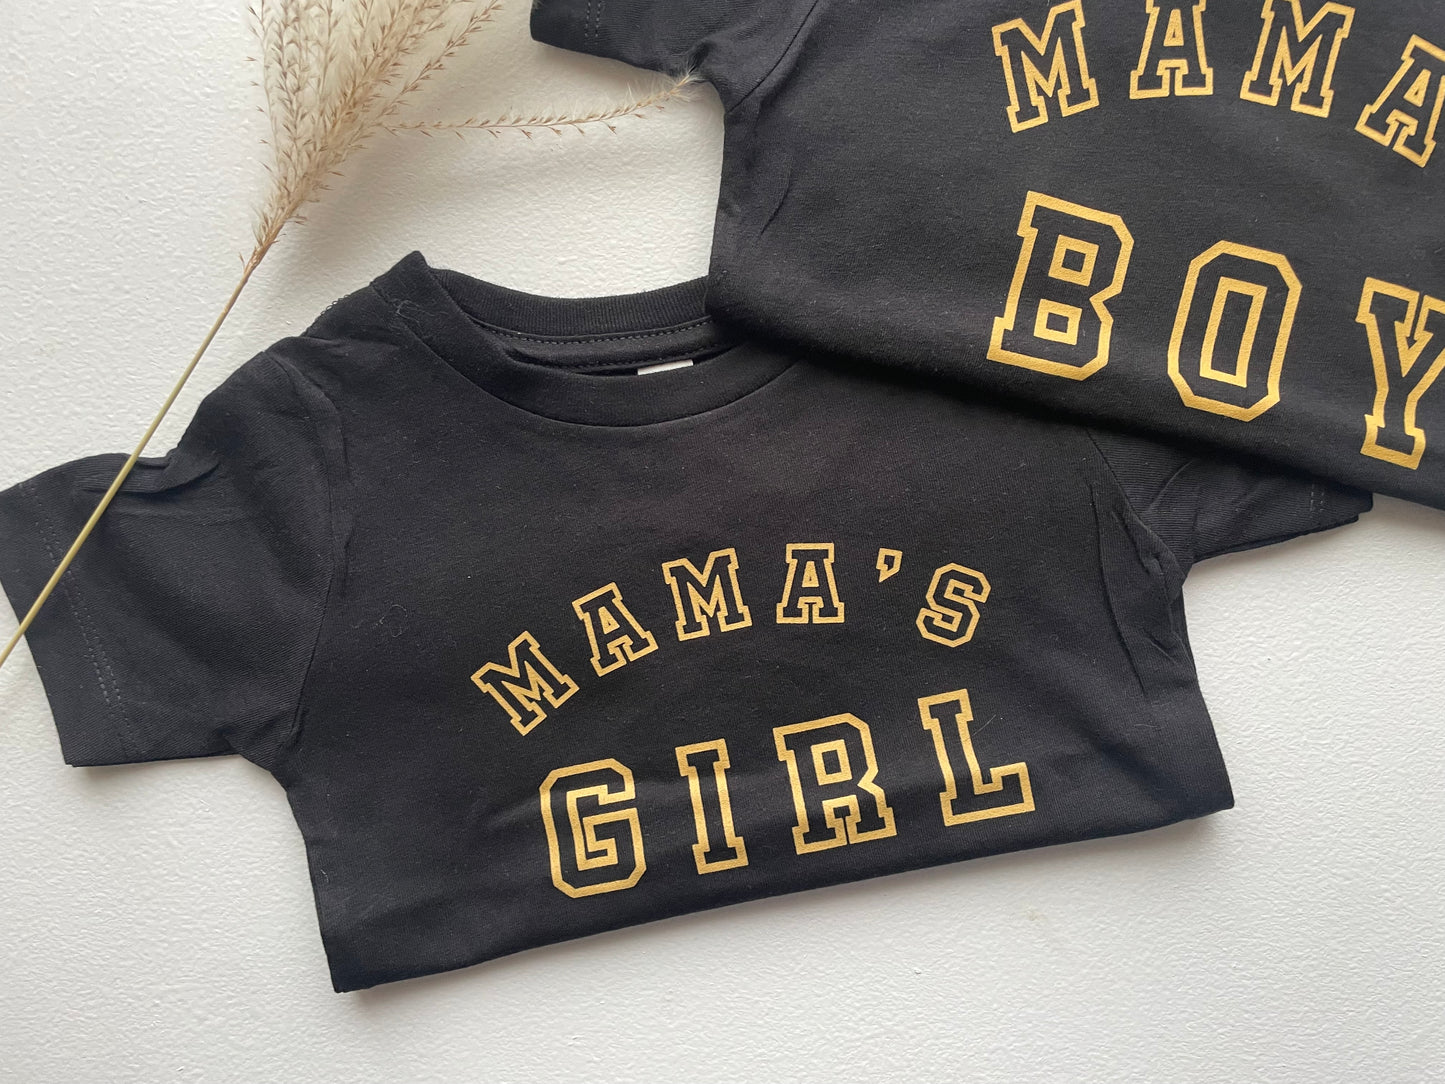 The Mama’s T